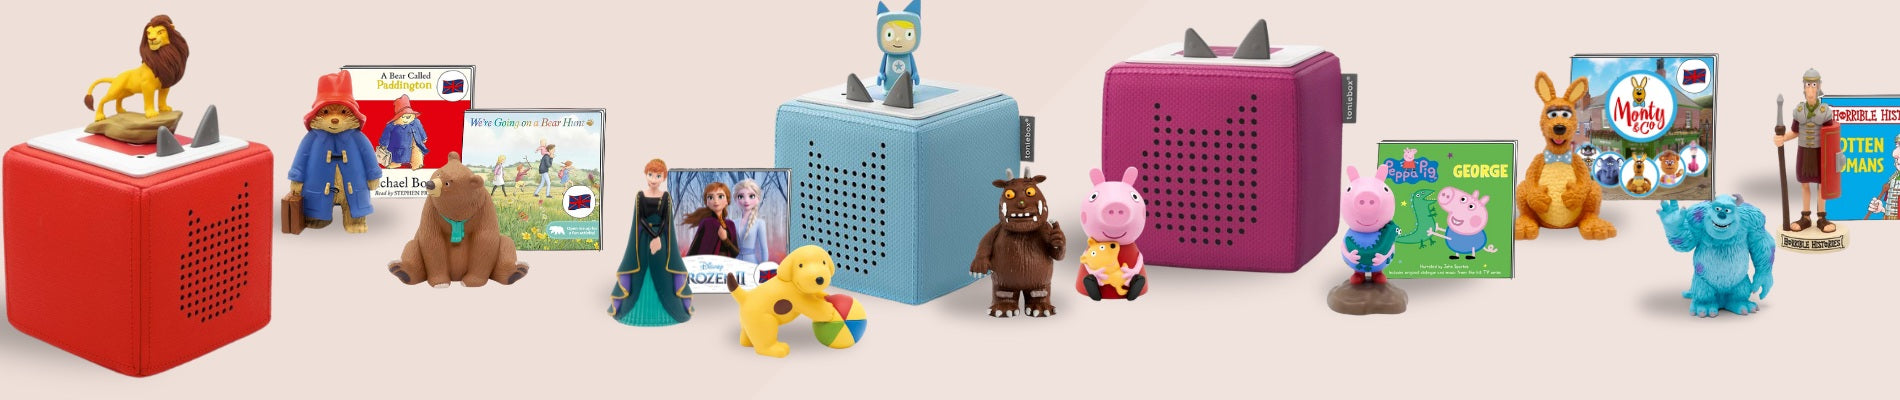 Selection of Toniebox music and audio players with characters such as Spot the Dog, The Gruffalo, Peppa Pig and more.